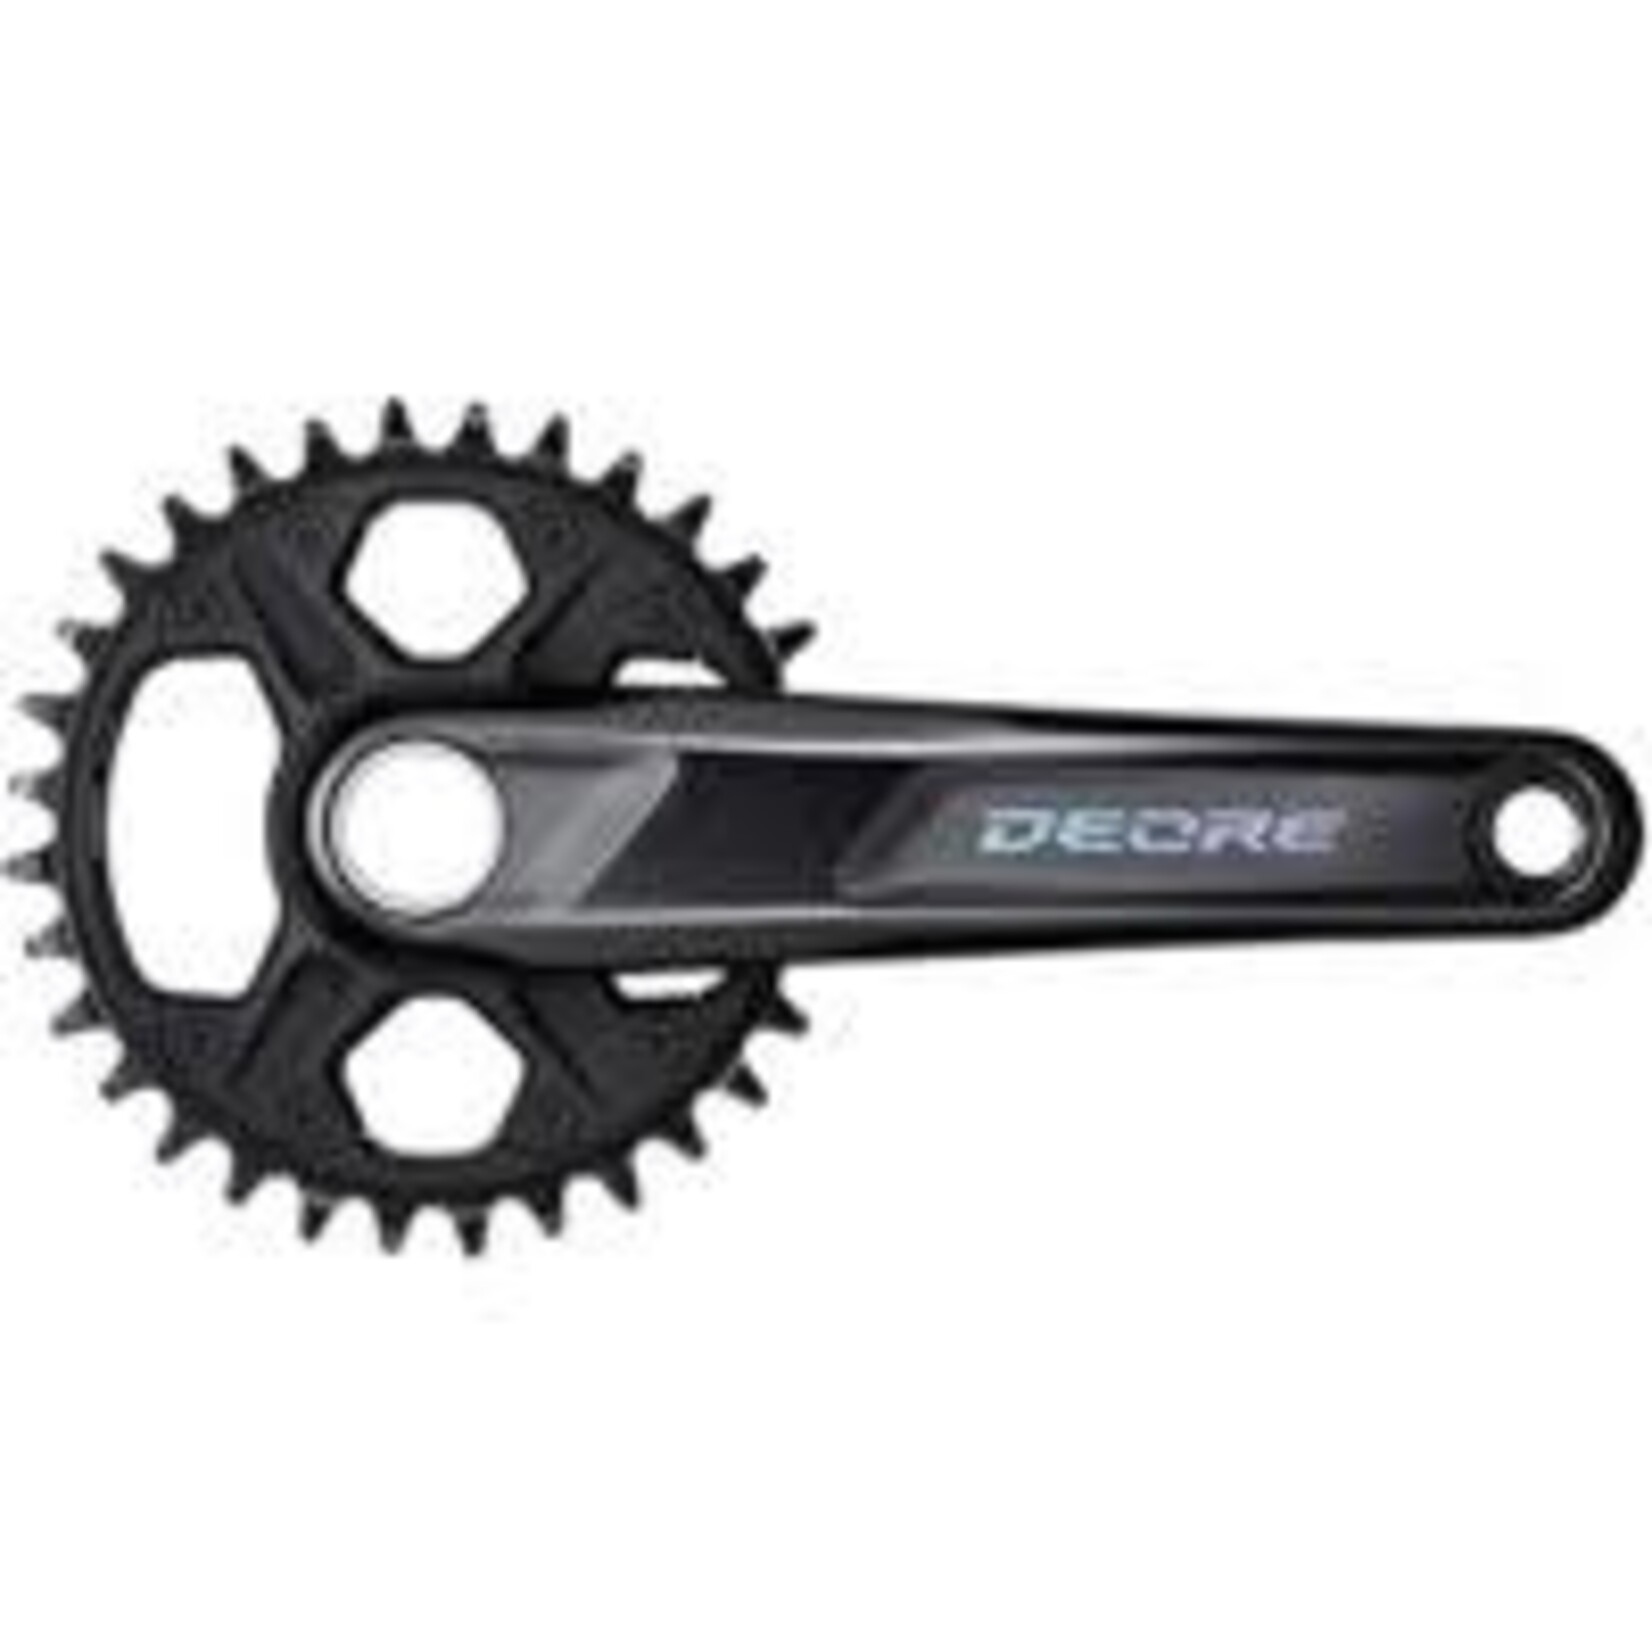 Shimano FRONT CHAINWHEEL, FC-M6120-1, DEORE, FOR REAR 12-SPEED, 2-PCS FC, 175MM, 32T W/O CG, W/O BB PARTS, FOR CHAIN LINE 55MM